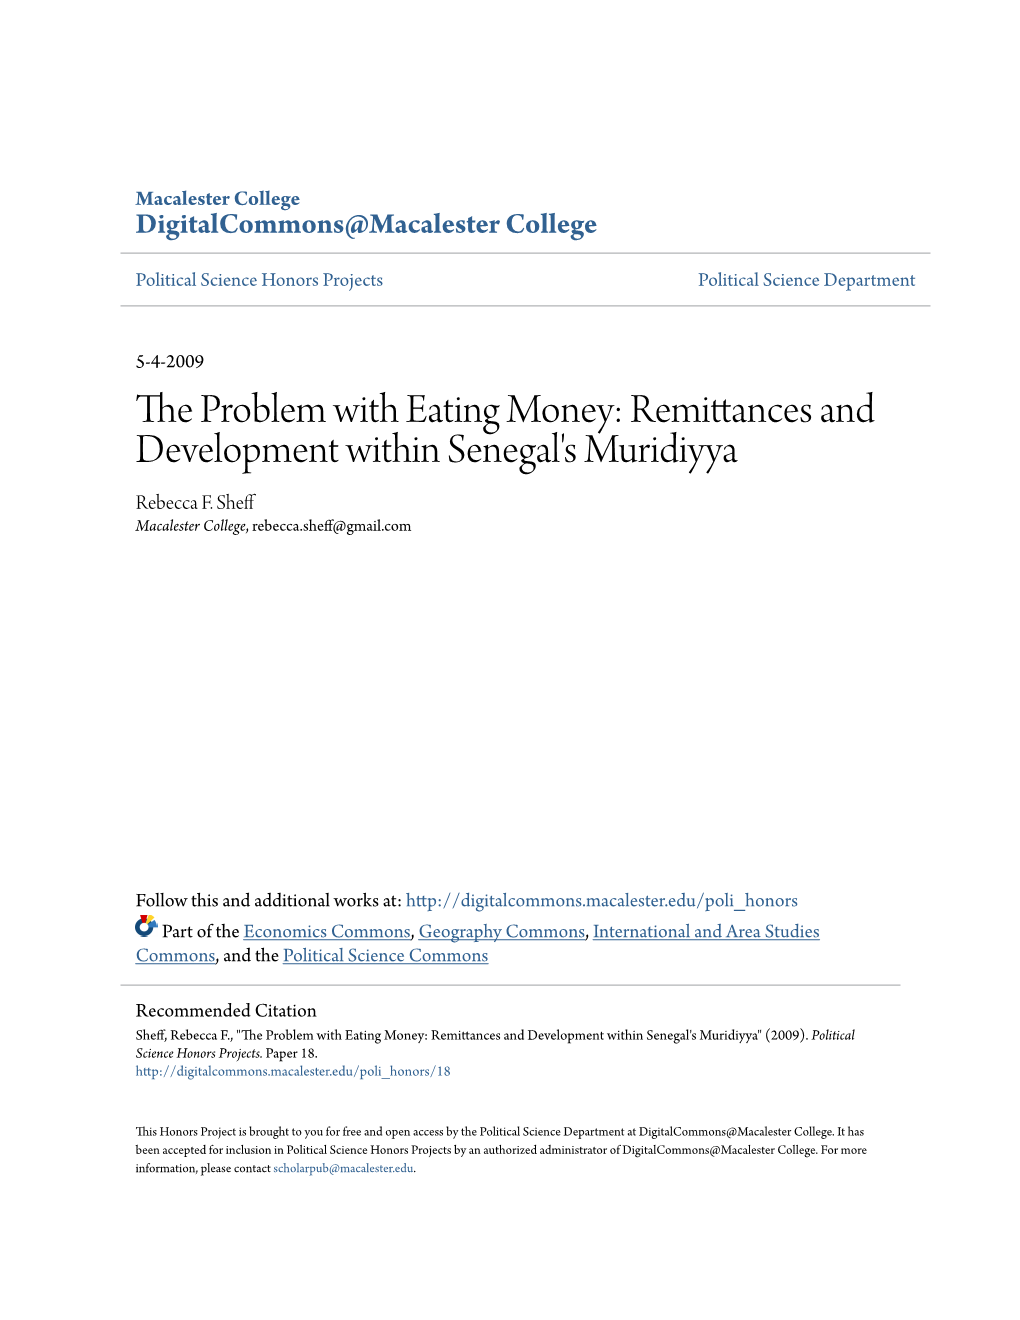 The Problem with Eating Money: Remittances and Development Within Senegal's Muridiyya